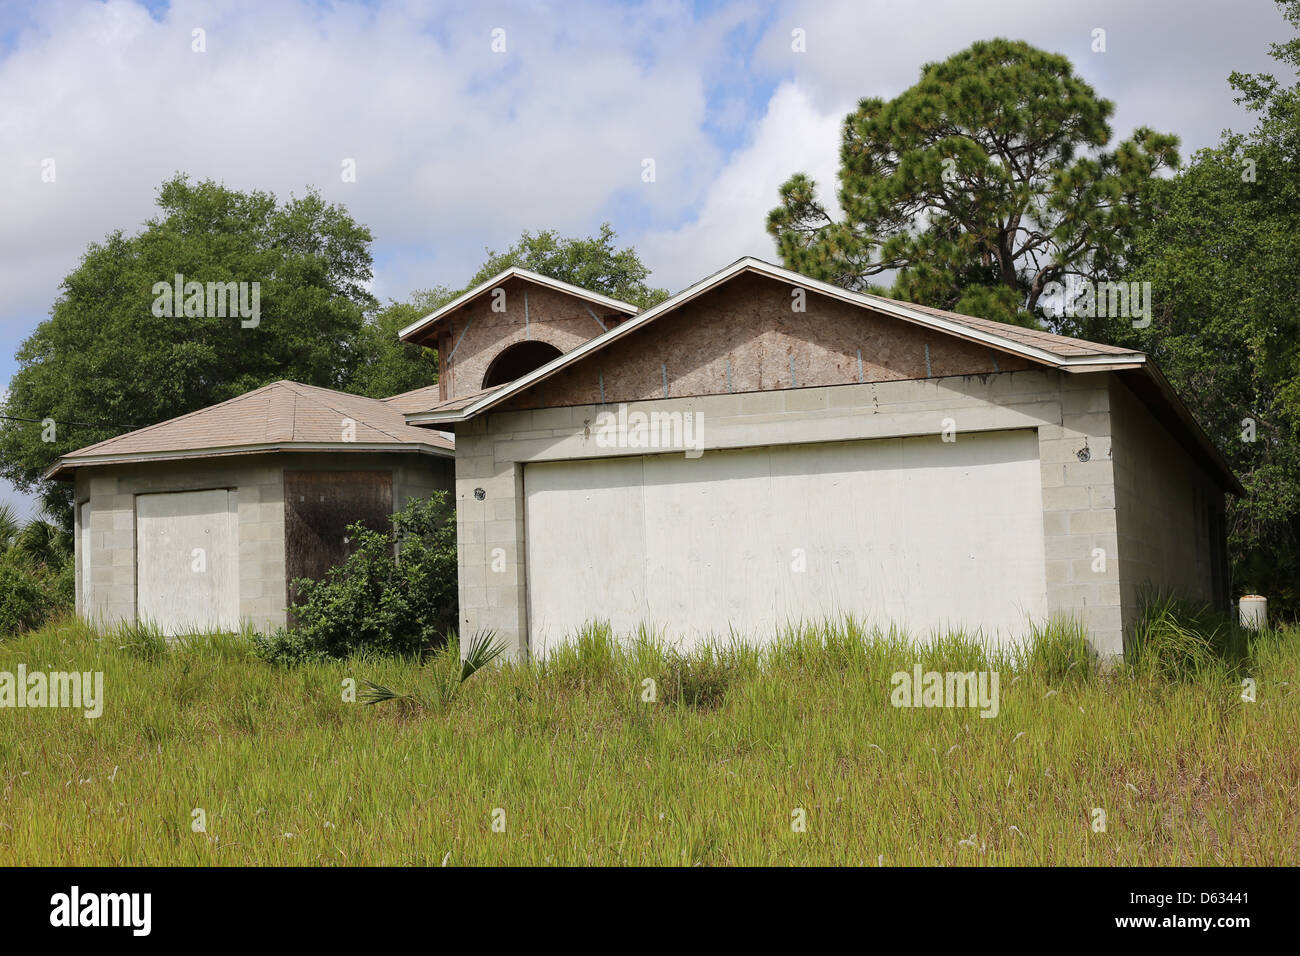 an unfinished or uncompleted home or house in Florida USA that was abandoned during the 2009 economic recession Stock Photo